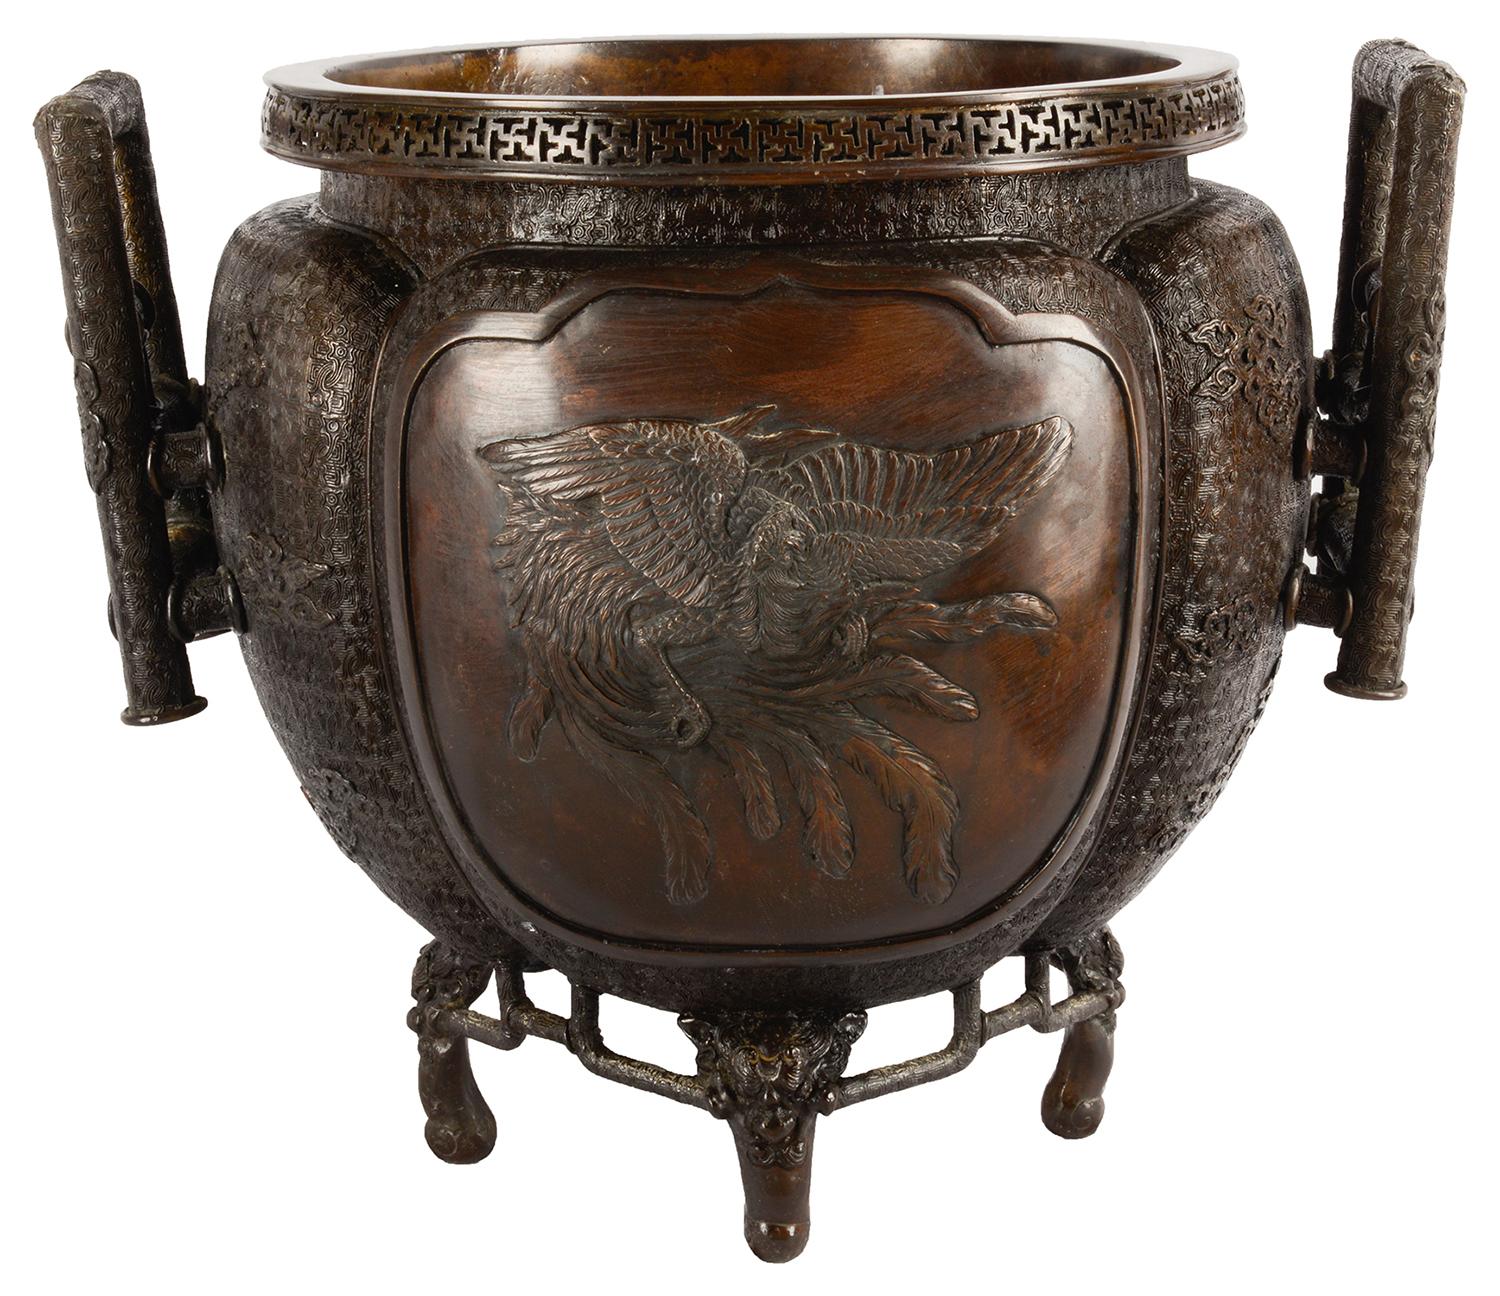 A very good quality 19th century, Meiji period (1868-1912) Bronze two handled jardiniere, having wonderful engraved and embossed classical motifs and inset panels depicting mythical dragon and bird like creatures. Measures: 40cm (16